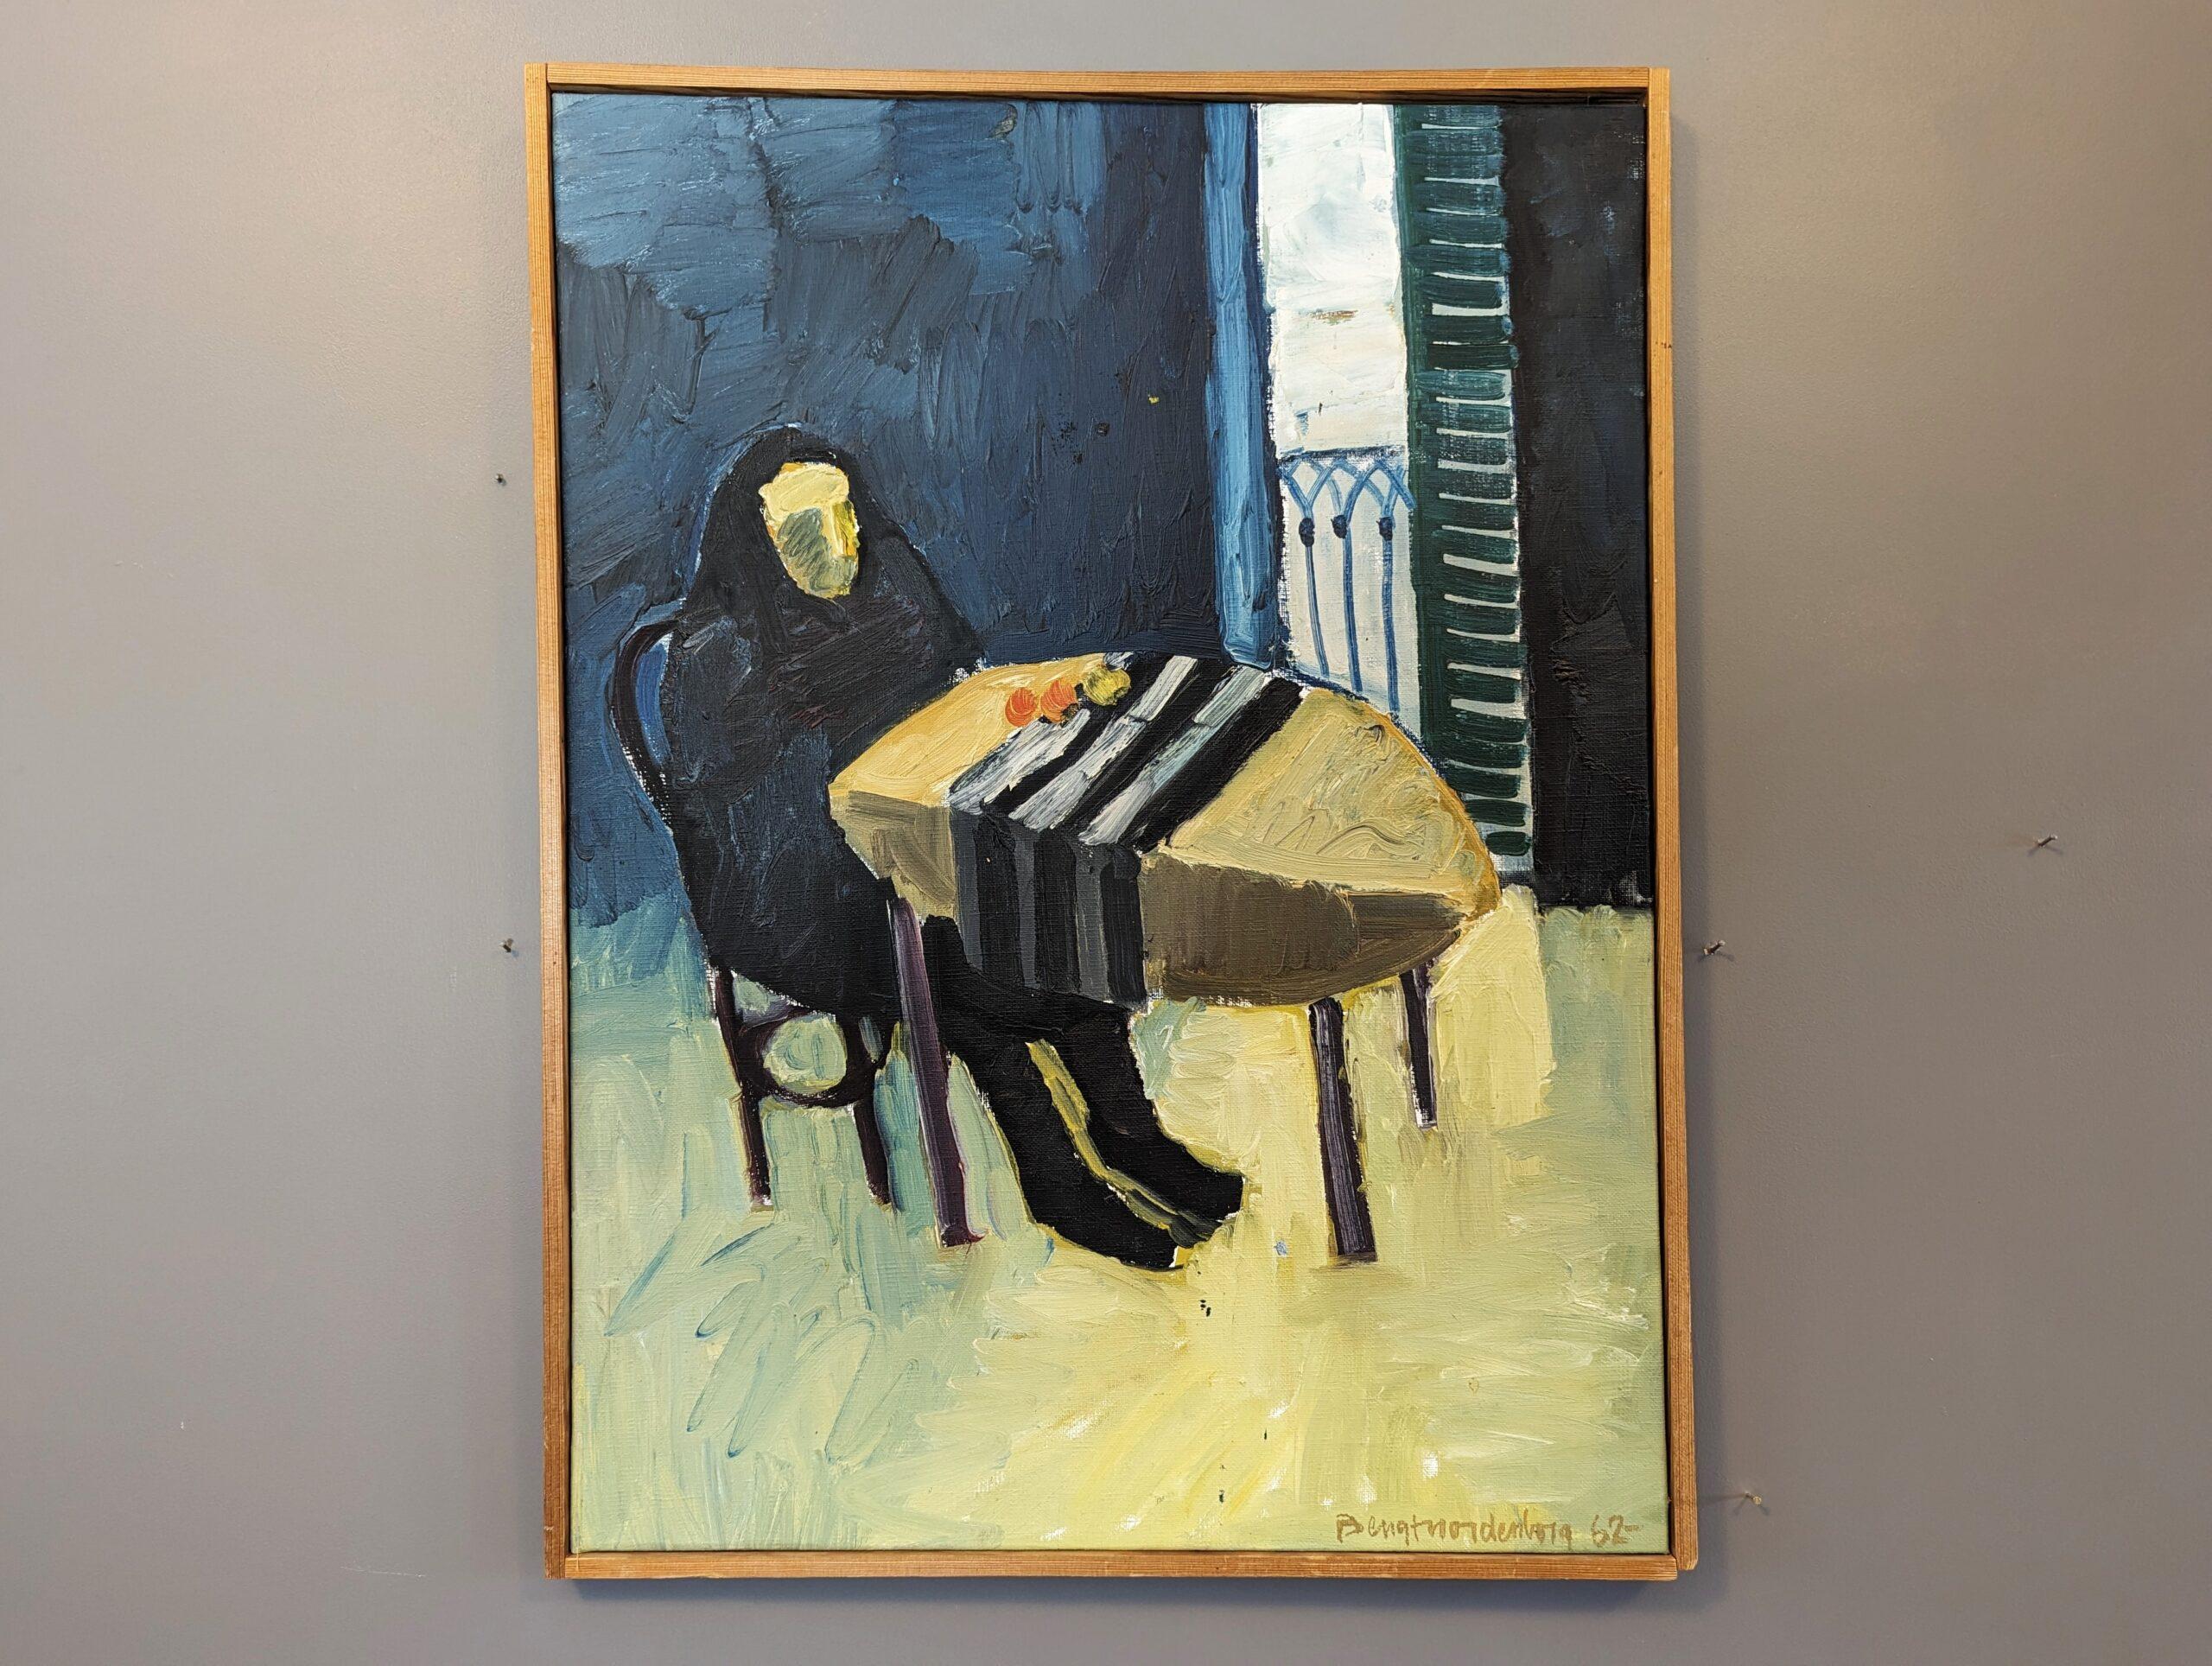 THE LONELY DINER
Size: 63 x 48 cm (including frame)
Oil on Canvas

An emotive mid-century figurative composition, executed in oil onto canvas and dated 1962.

The focal point of the painting is a lonesome figure, dressed entirely in black, seated